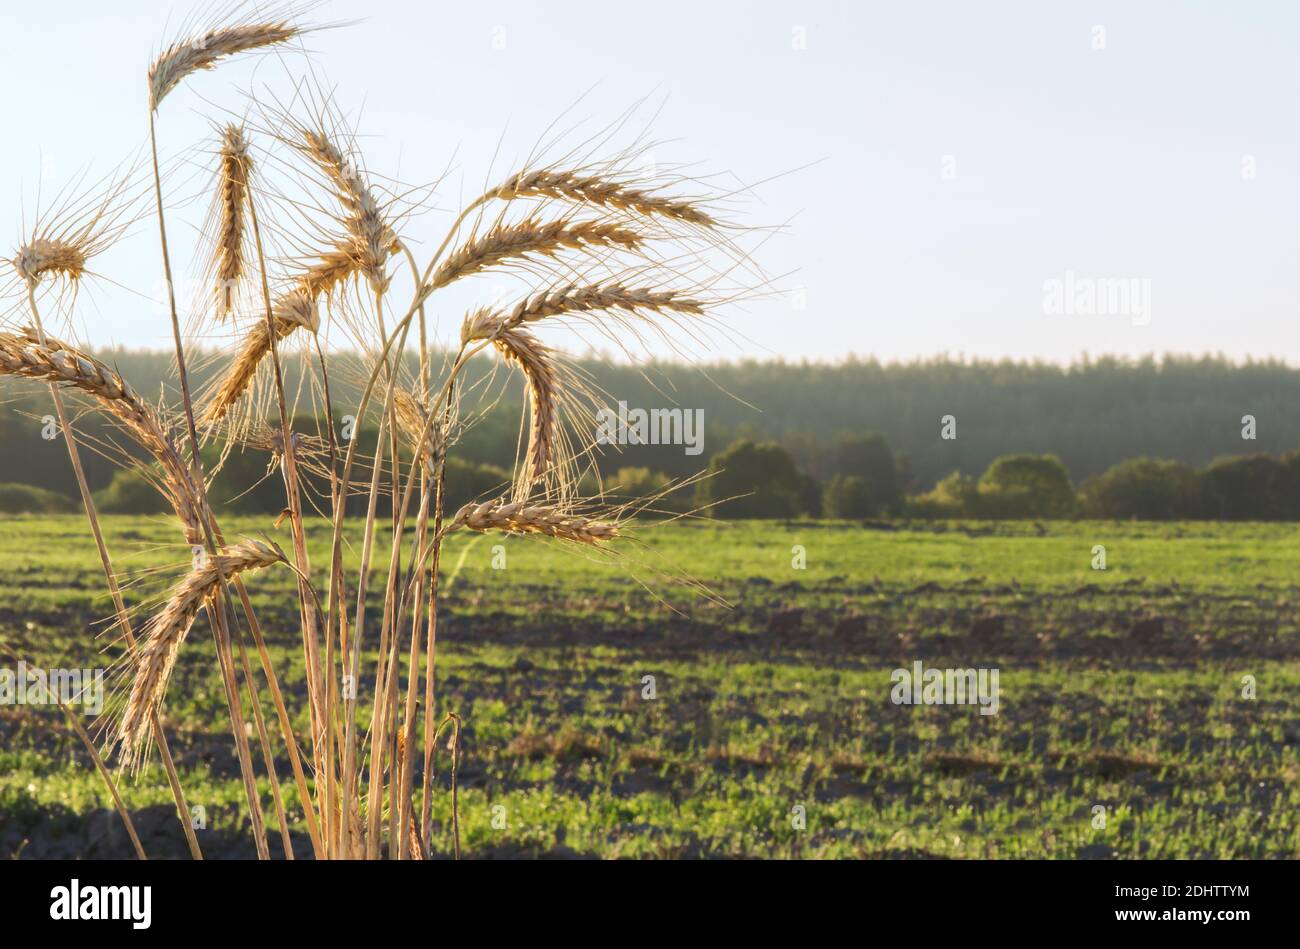 Spikelets of wheat on the background of a plowed field. Stock Photo